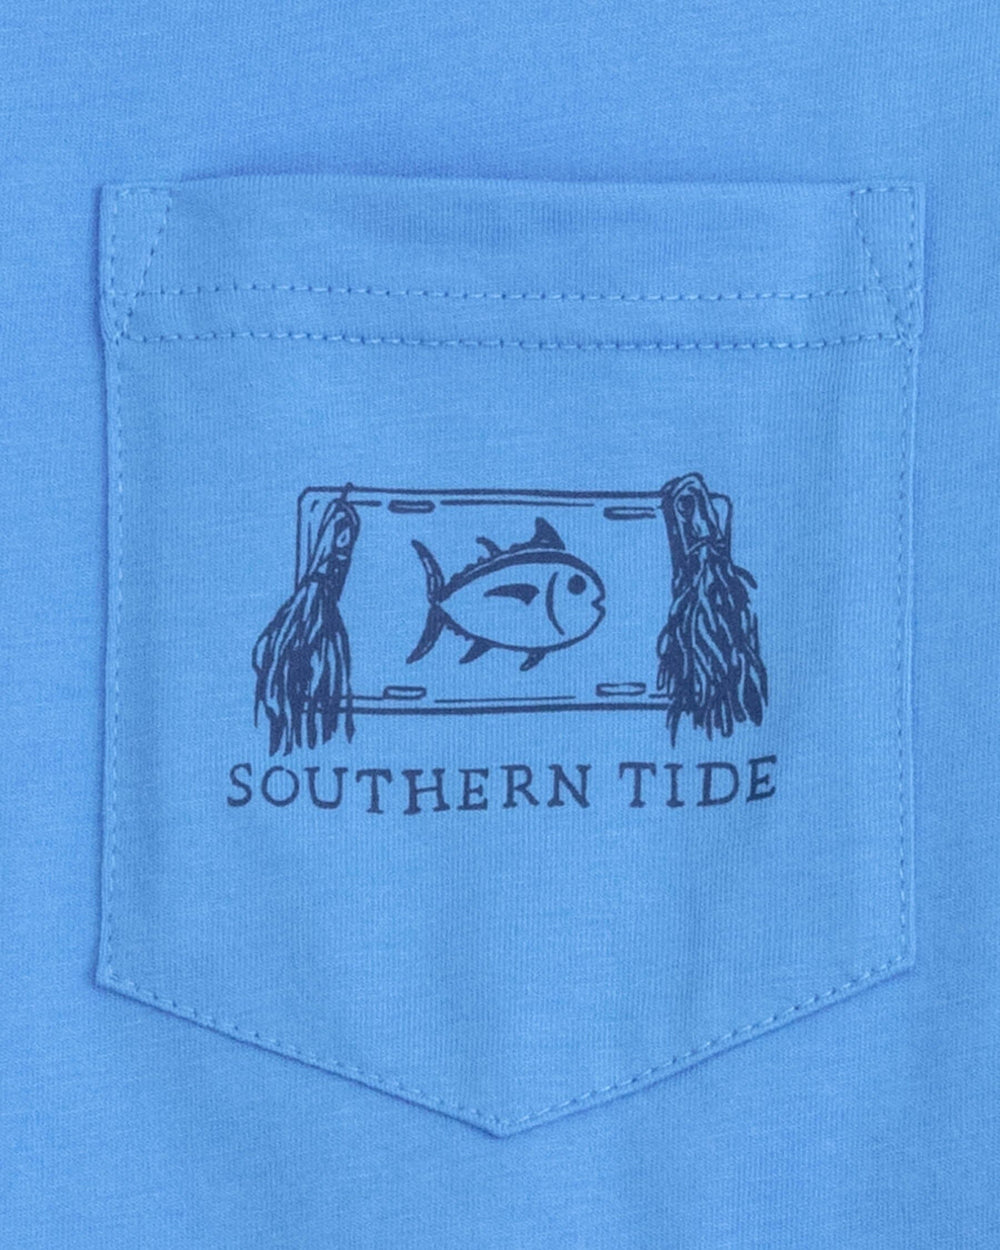 The detail view of the Southern Tide Trophy Room T-Shirt by Southern Tide - Boat Blue